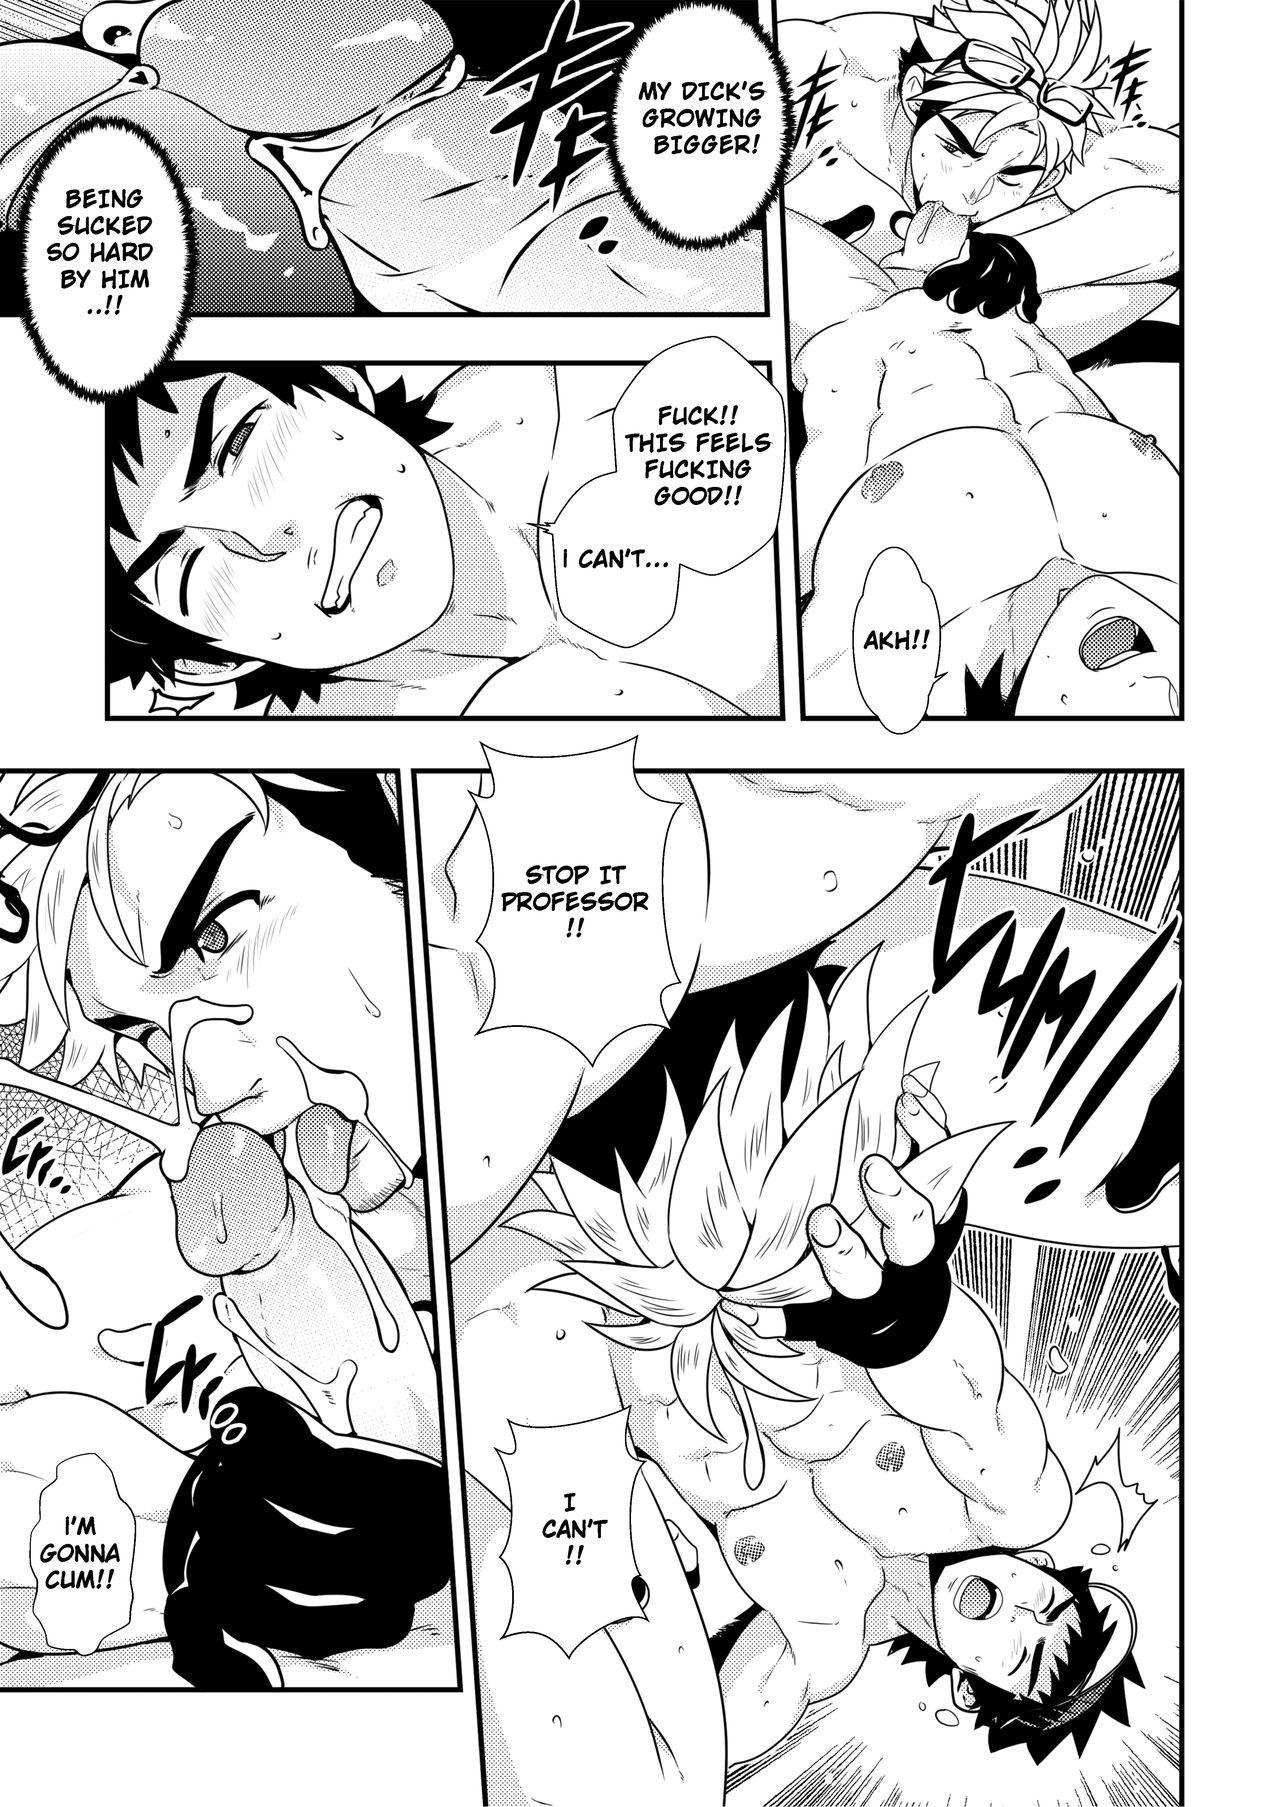 Orgasm Let's GO! TRAIN!! - Pokemon Indian - Page 10